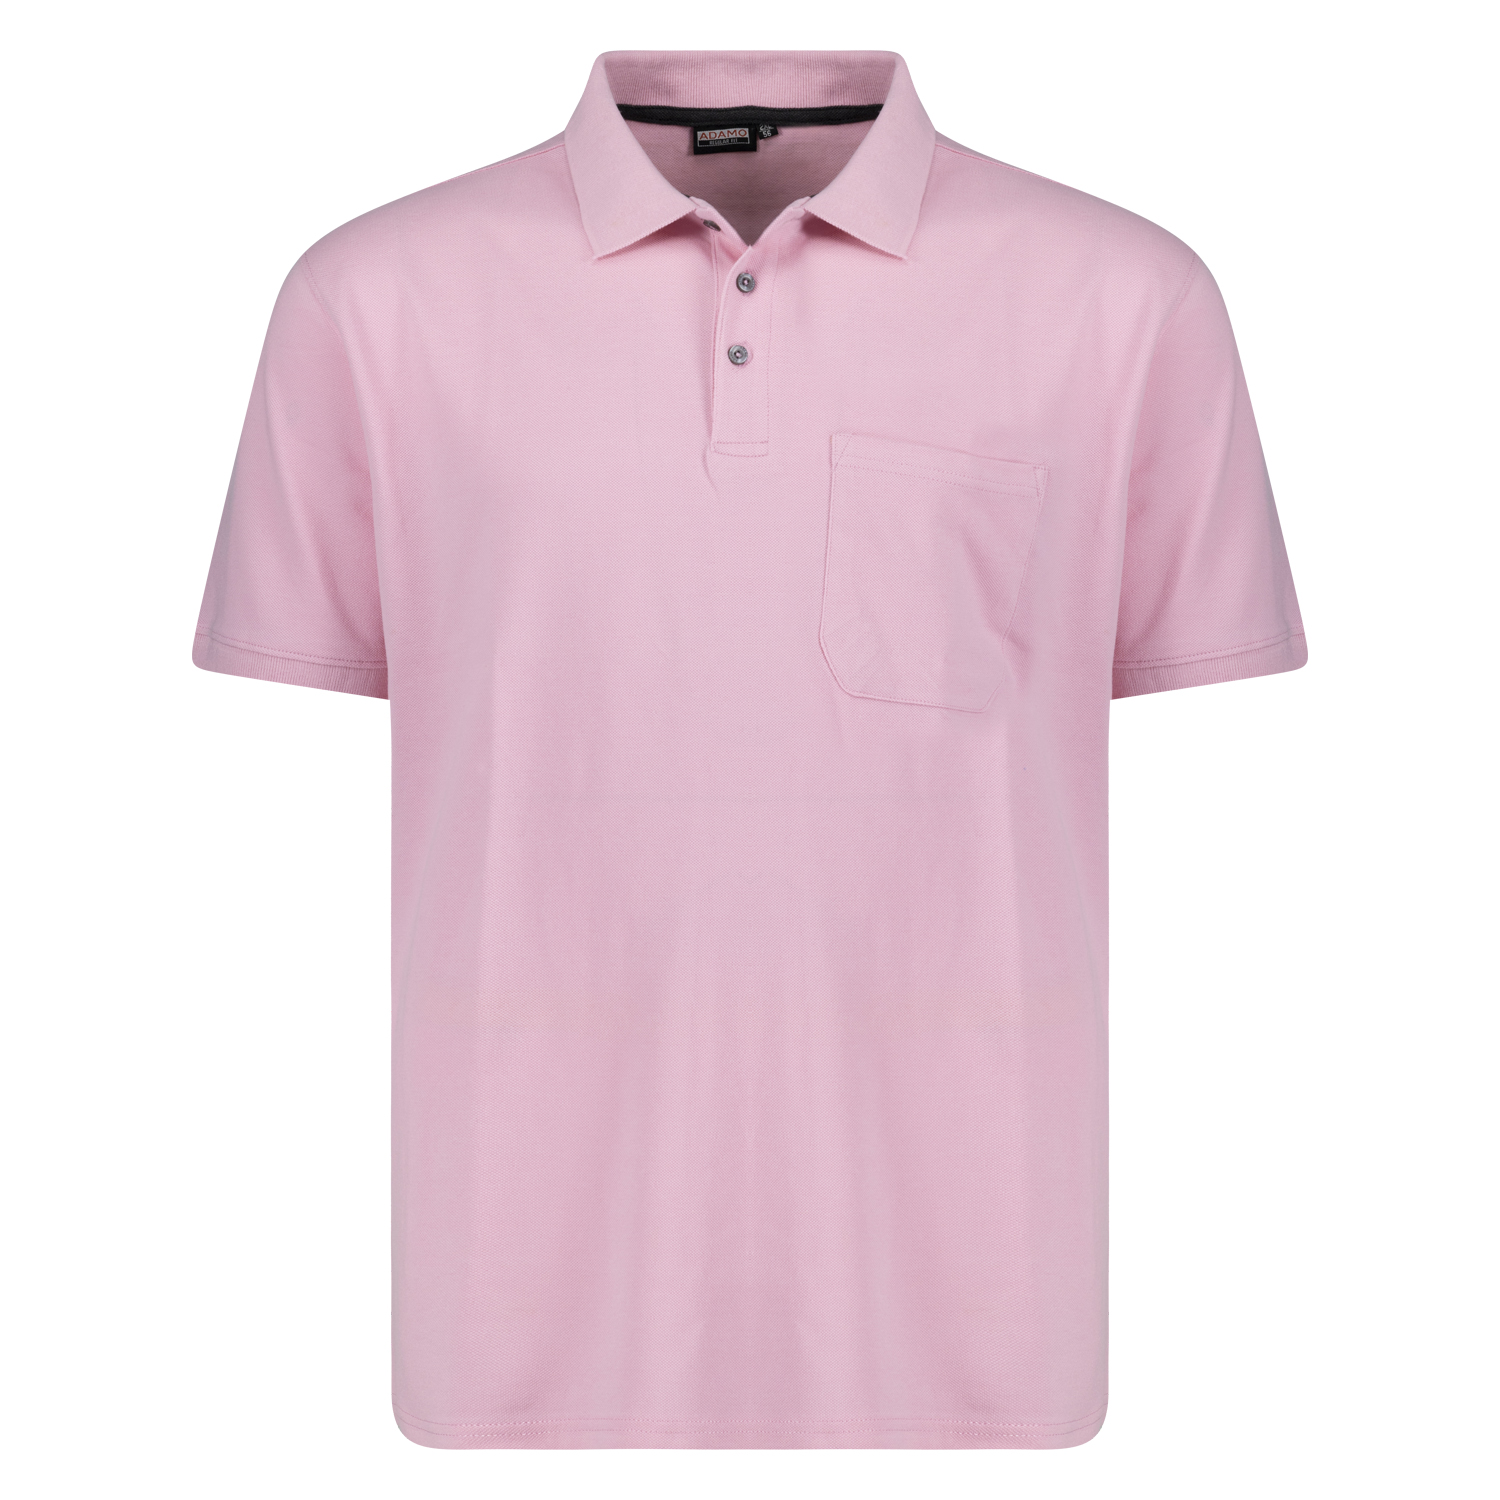 Short sleeve polo shirt REGULAR FIT series Klaas by Adamo in pink up to oversize 10XL